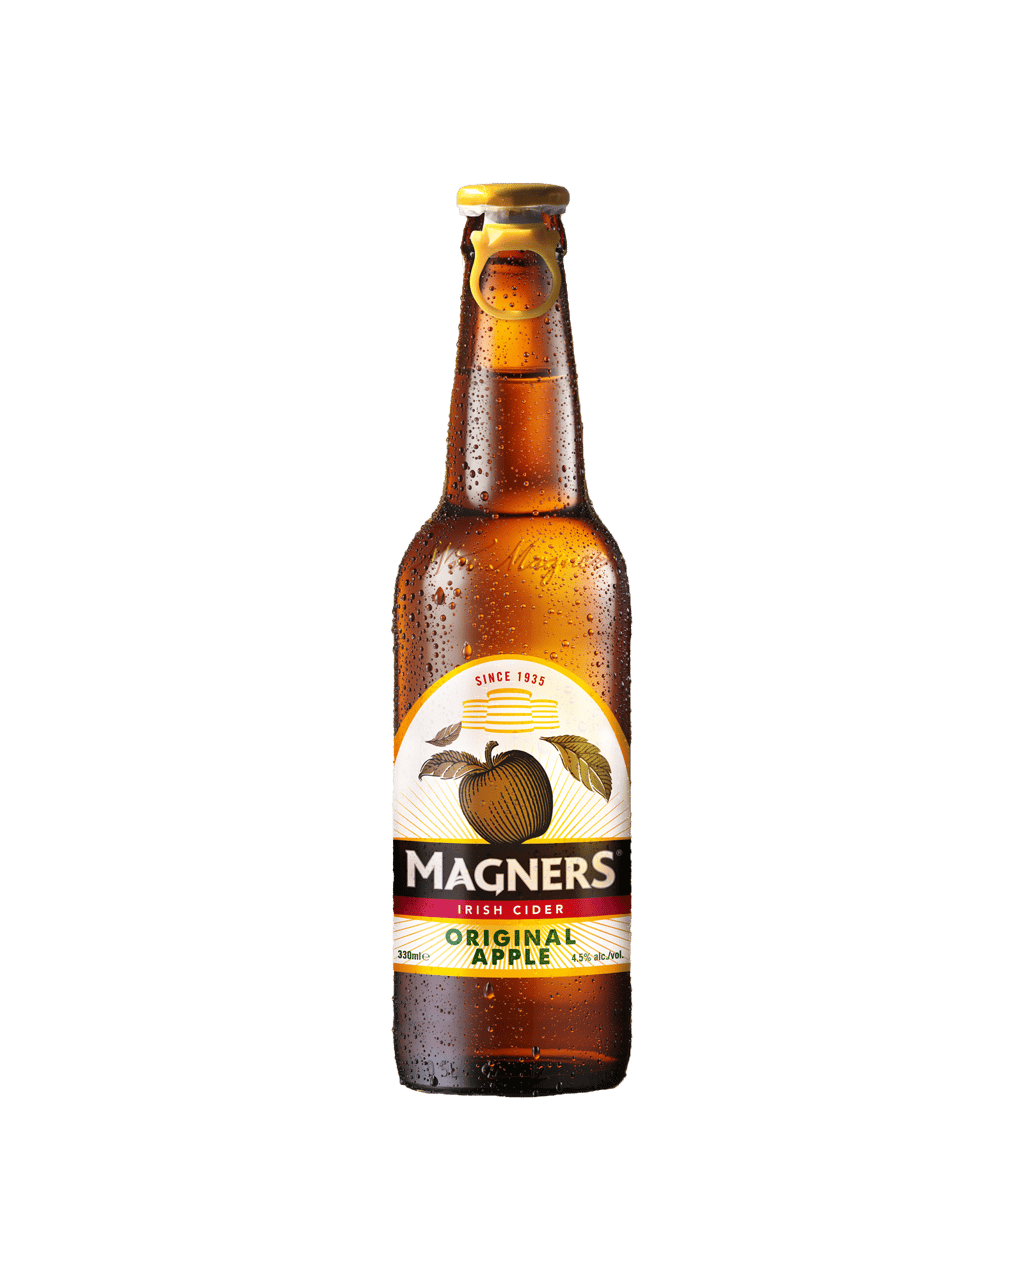 Buy Magners Original Cider Online or Near You in Australia [with Same Day Delivery* Best Offers] - Dan Murphy's